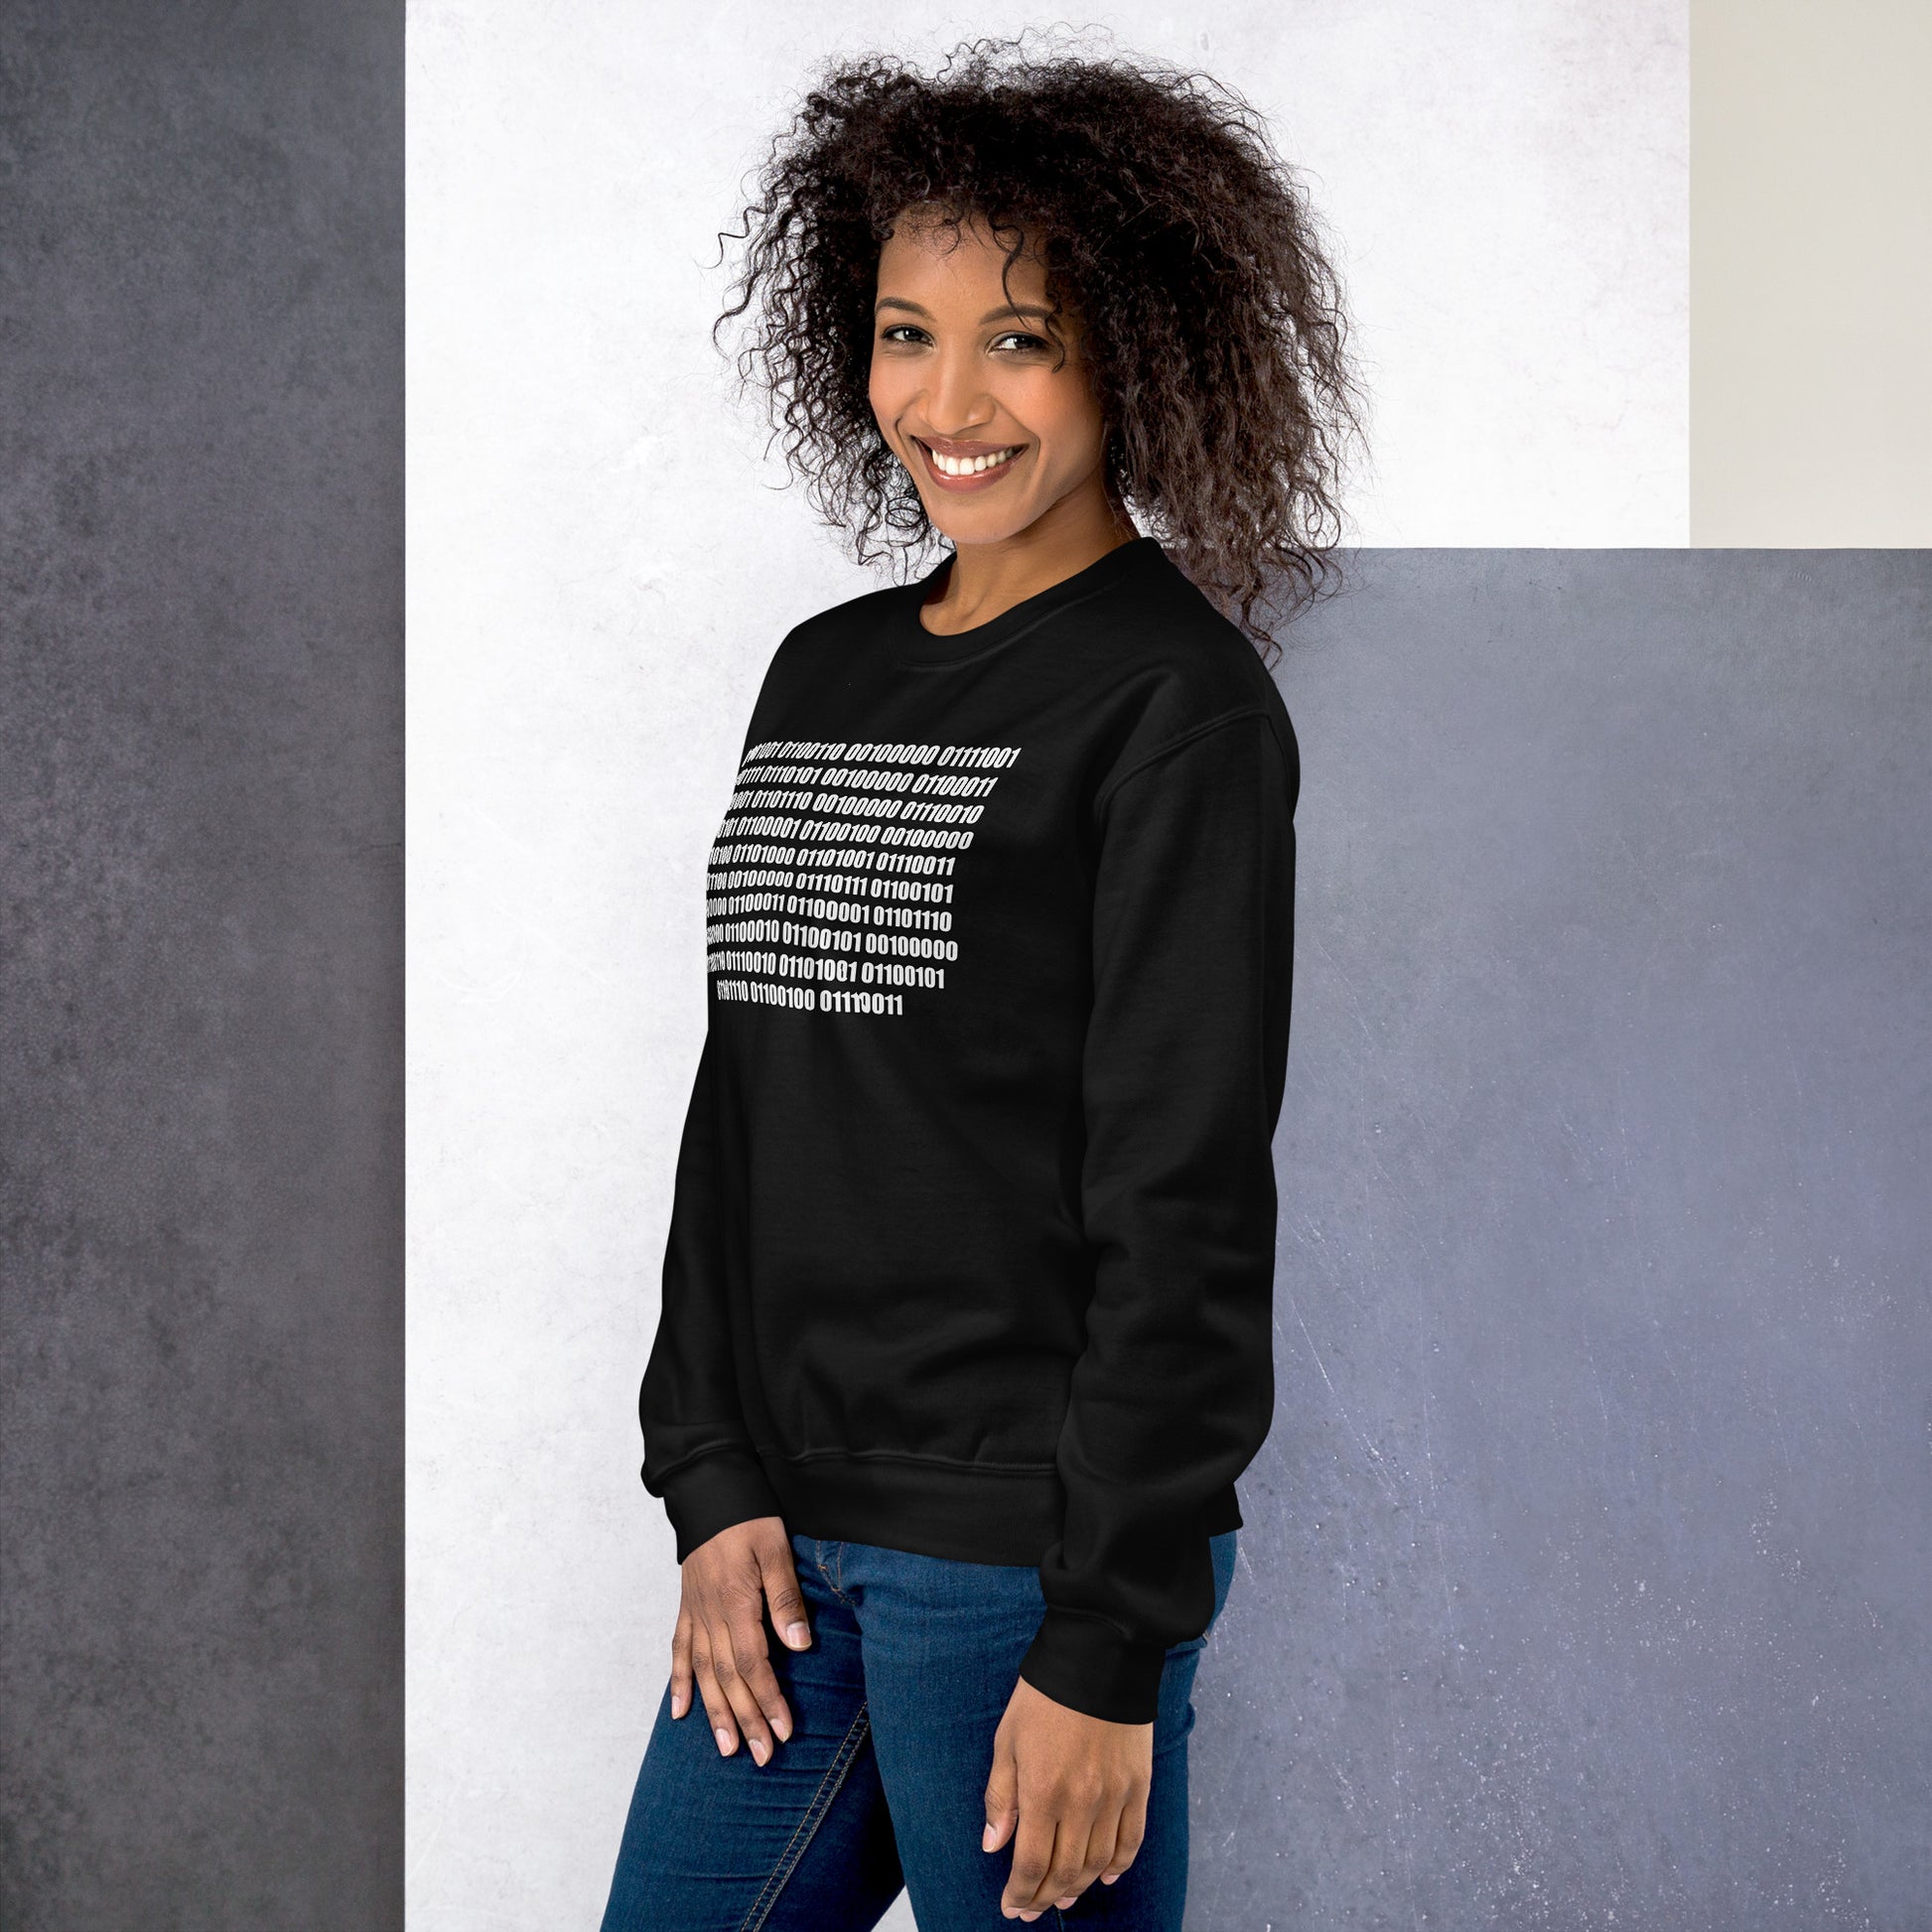 Women with black sweatshirt with binaire text "If you can read this"